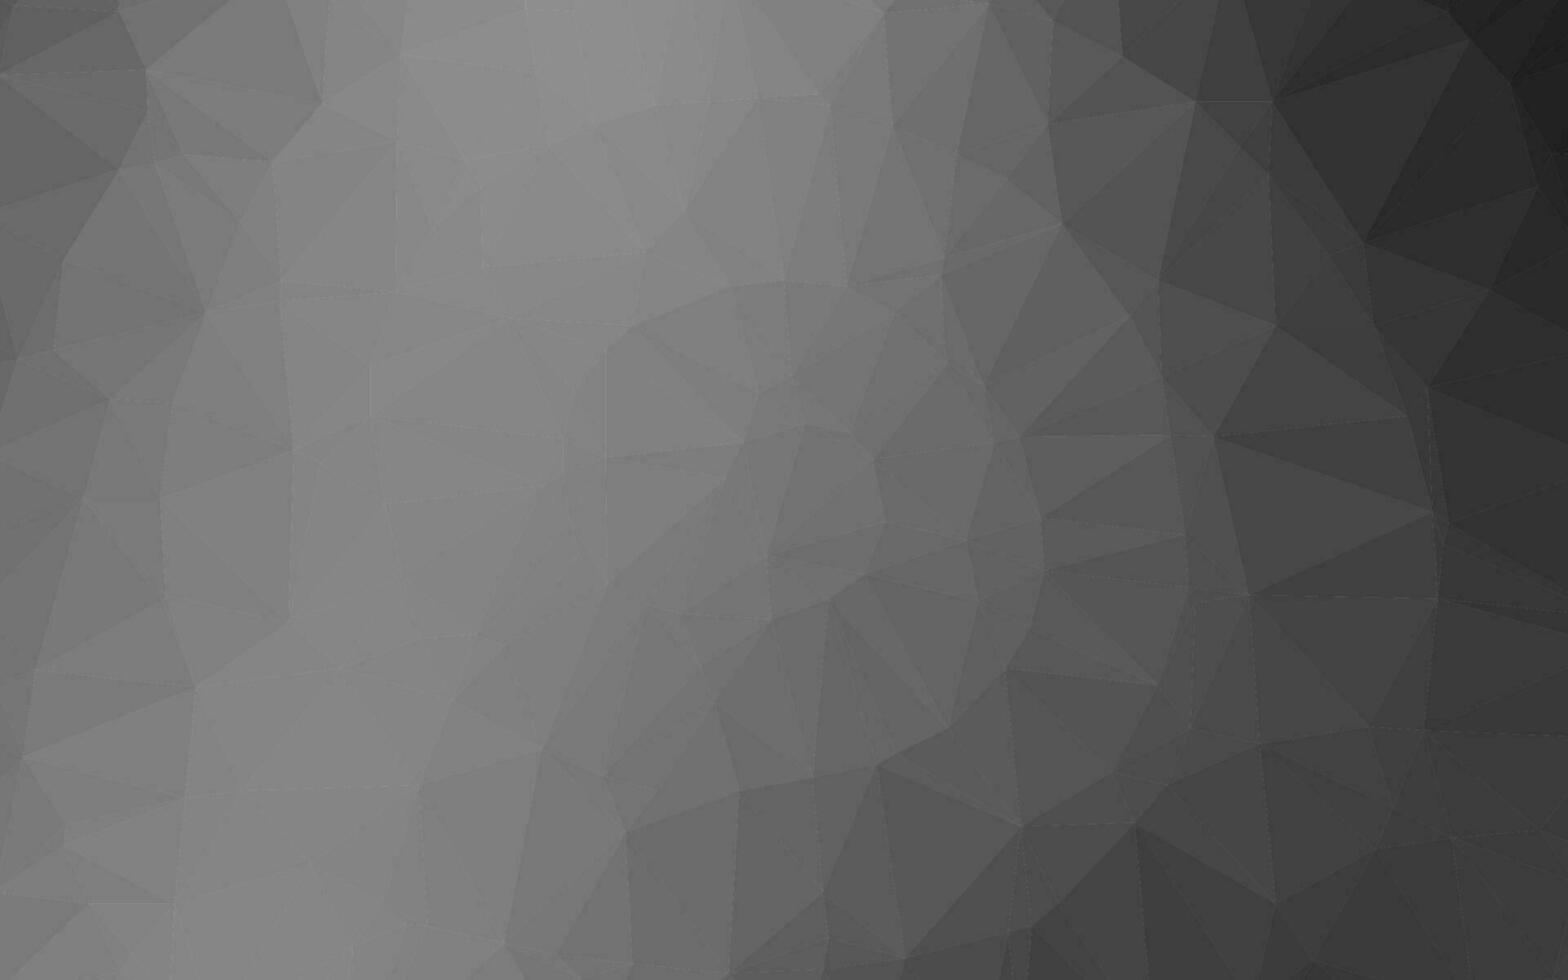 Light Silver, Gray vector triangle mosaic cover.